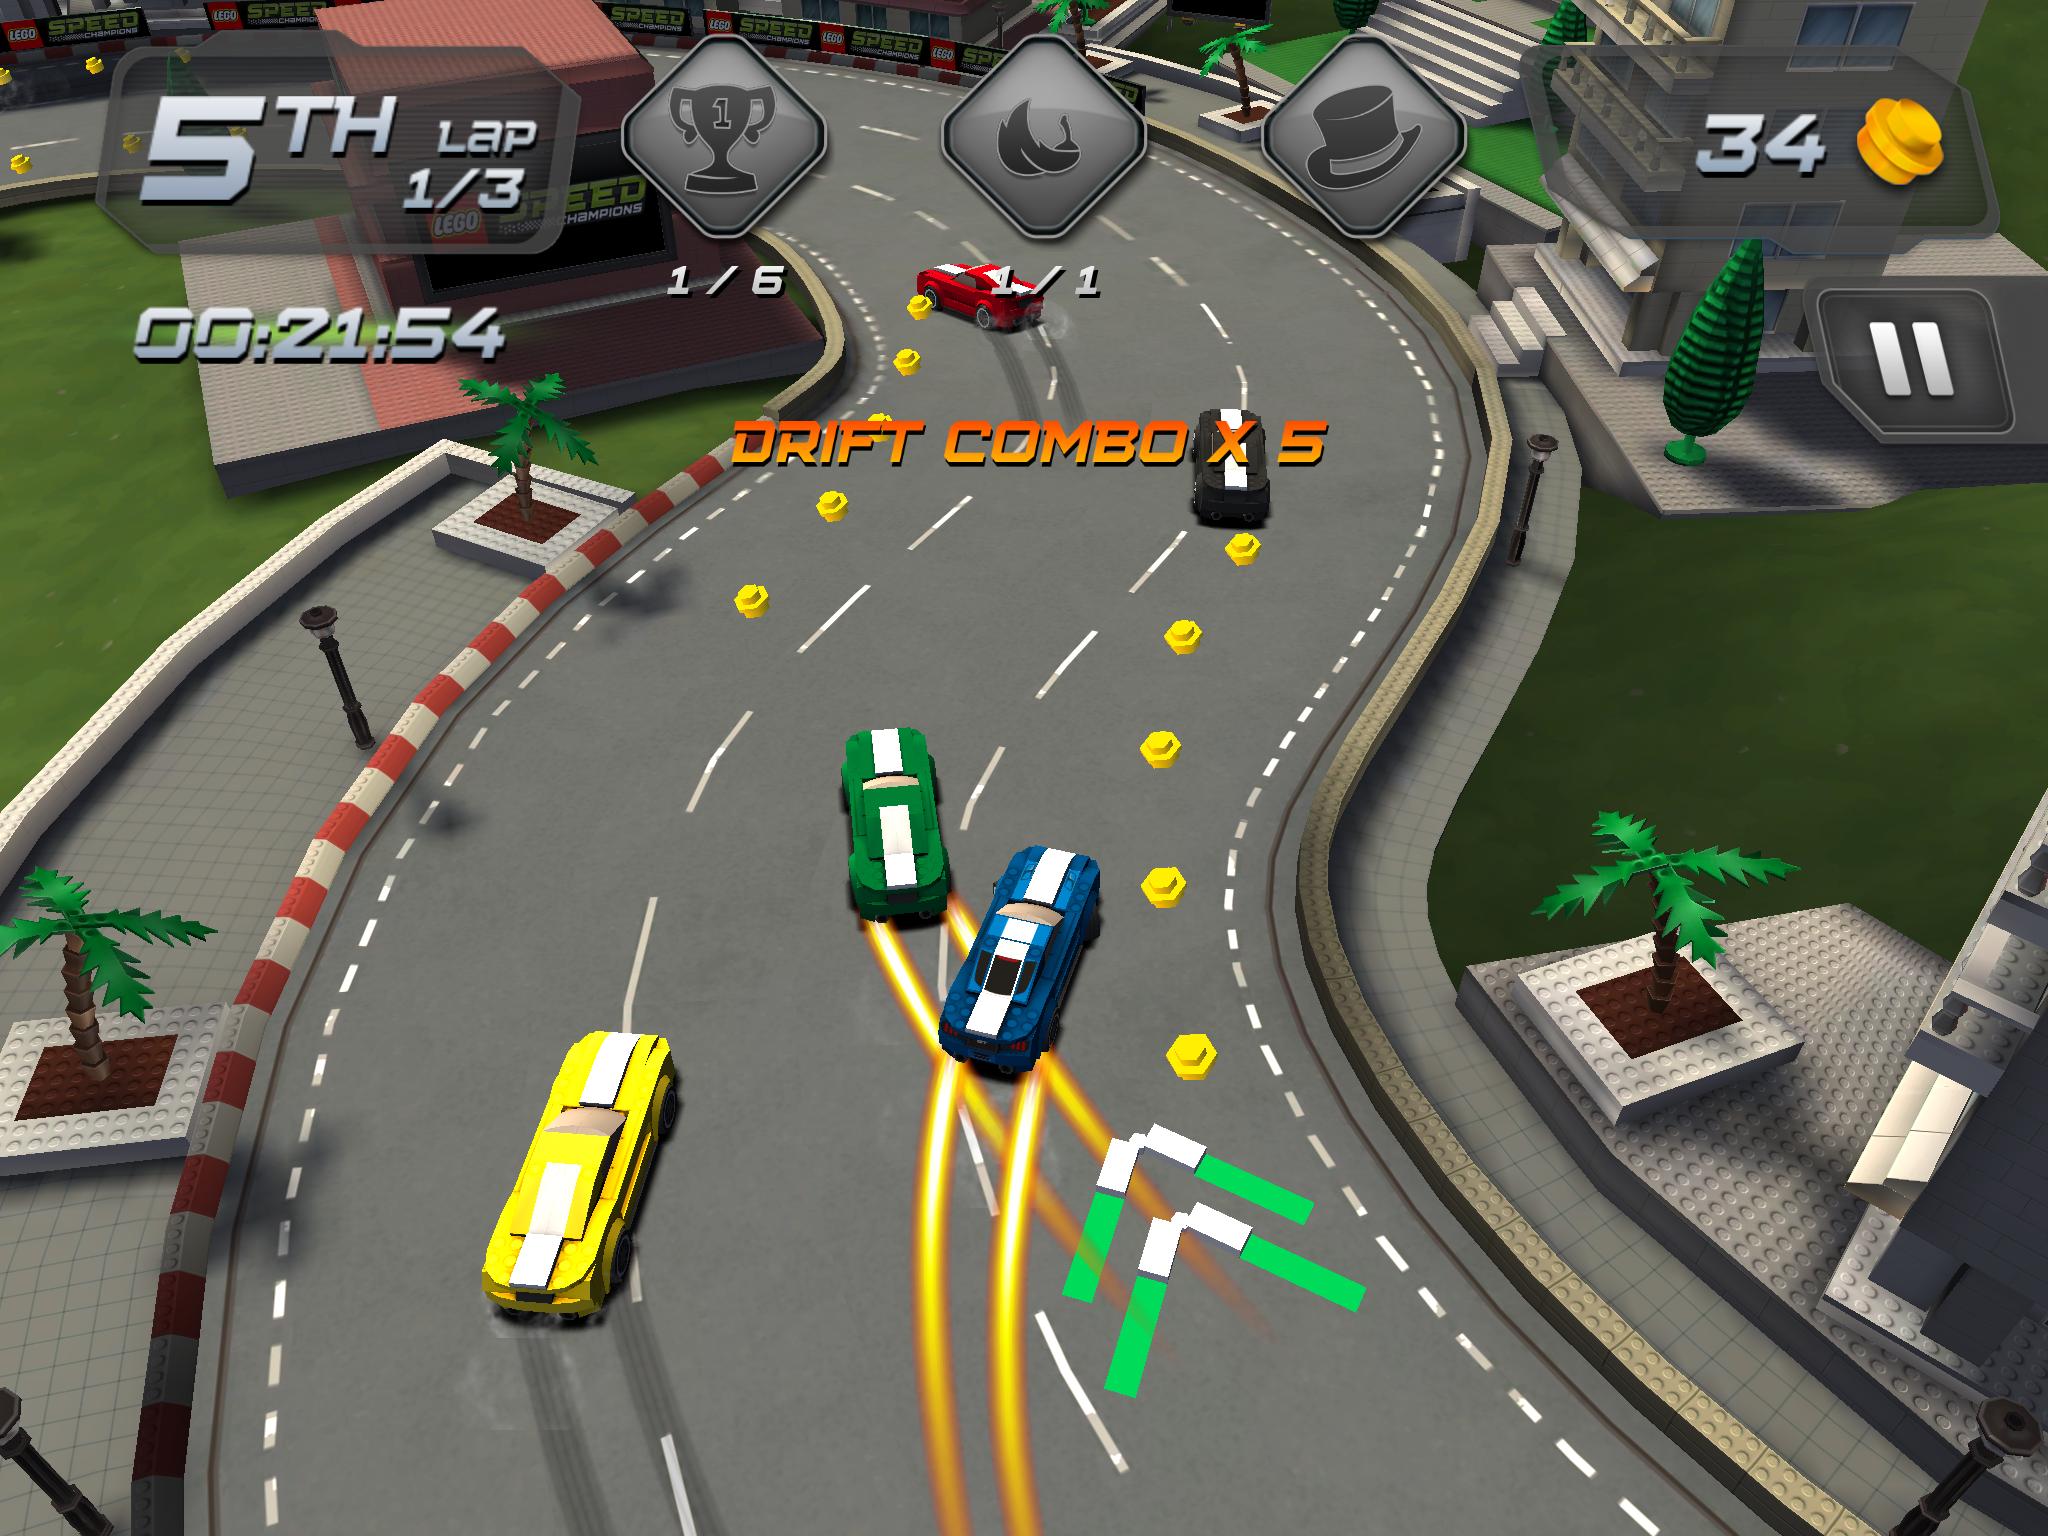 lego speed champions game download